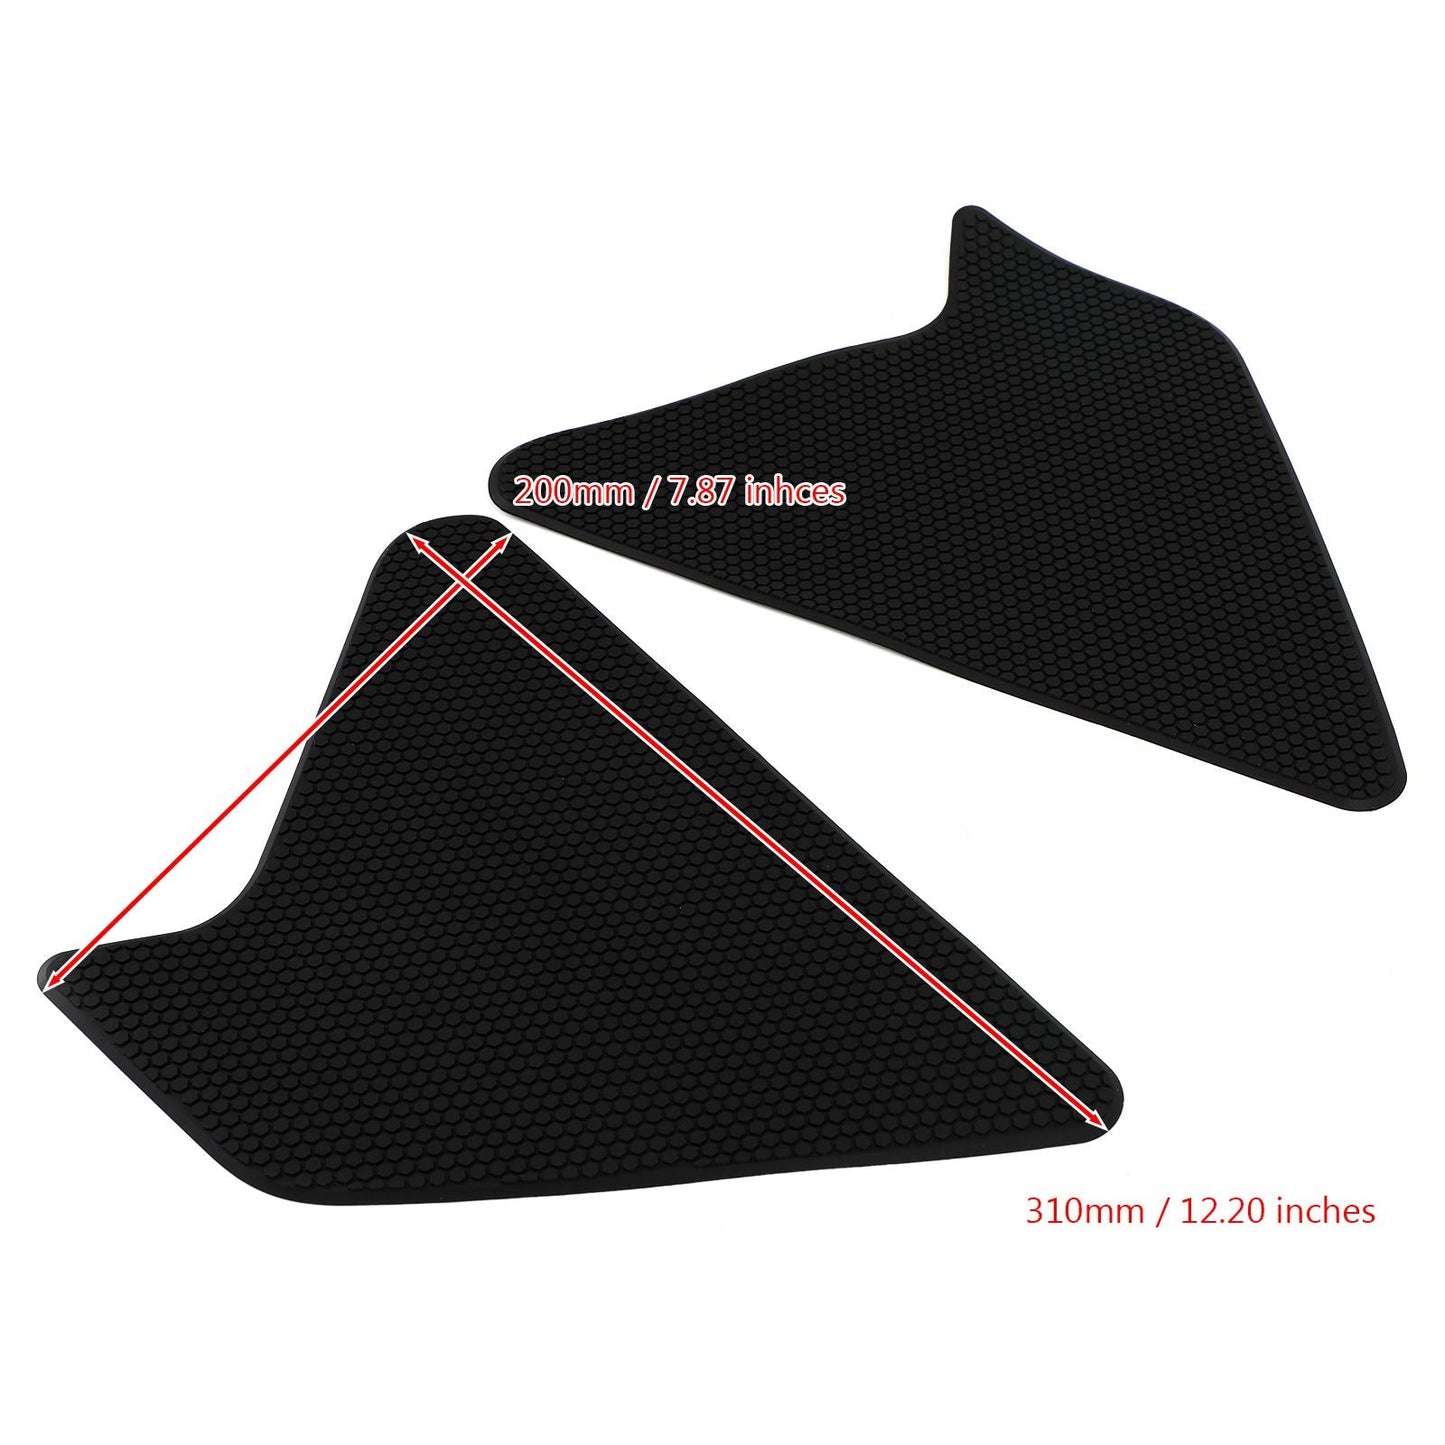 2x Side Tank Traction Grips Pads Fit for Yamaha XT1200Z Super Tenere 12-2019